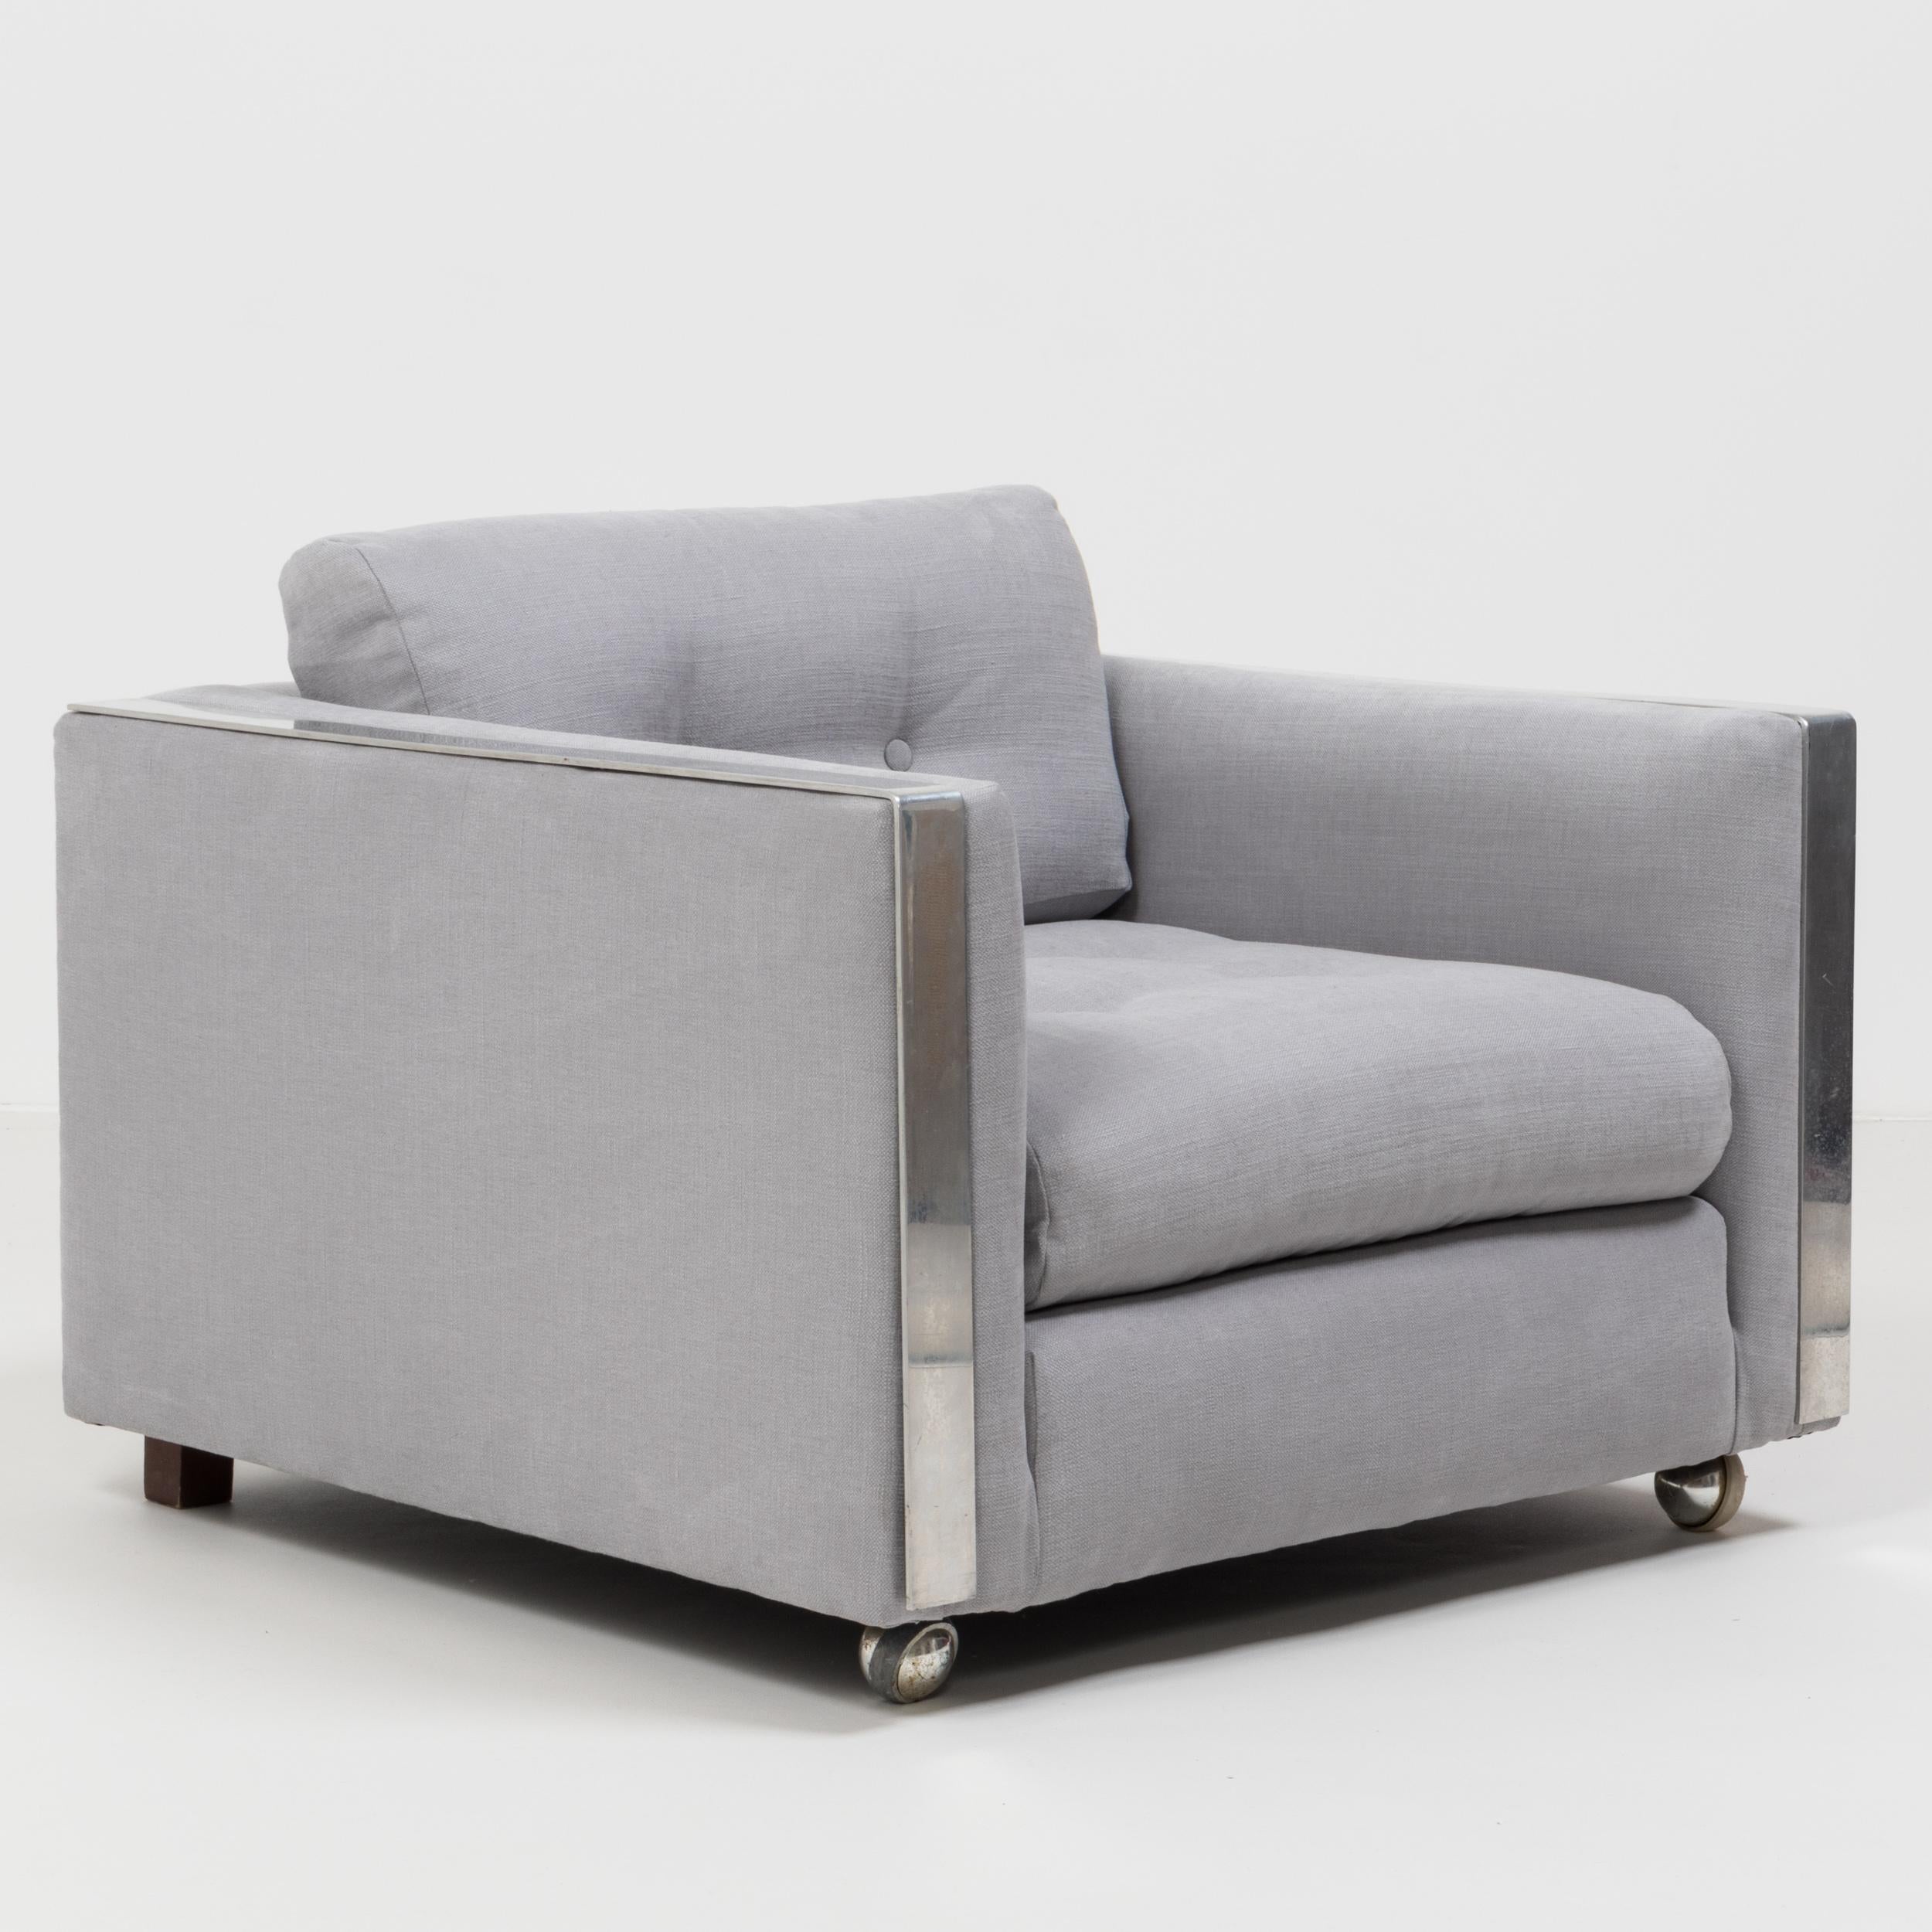 Designed in the style of Milo Baughman, this sleek mid century armchair has been newly upholstered in a sumptuously soft and airy grey Linara fabric that compliments the chrome detailing perfectly.
 
With its clean lines and cool aesthetic it